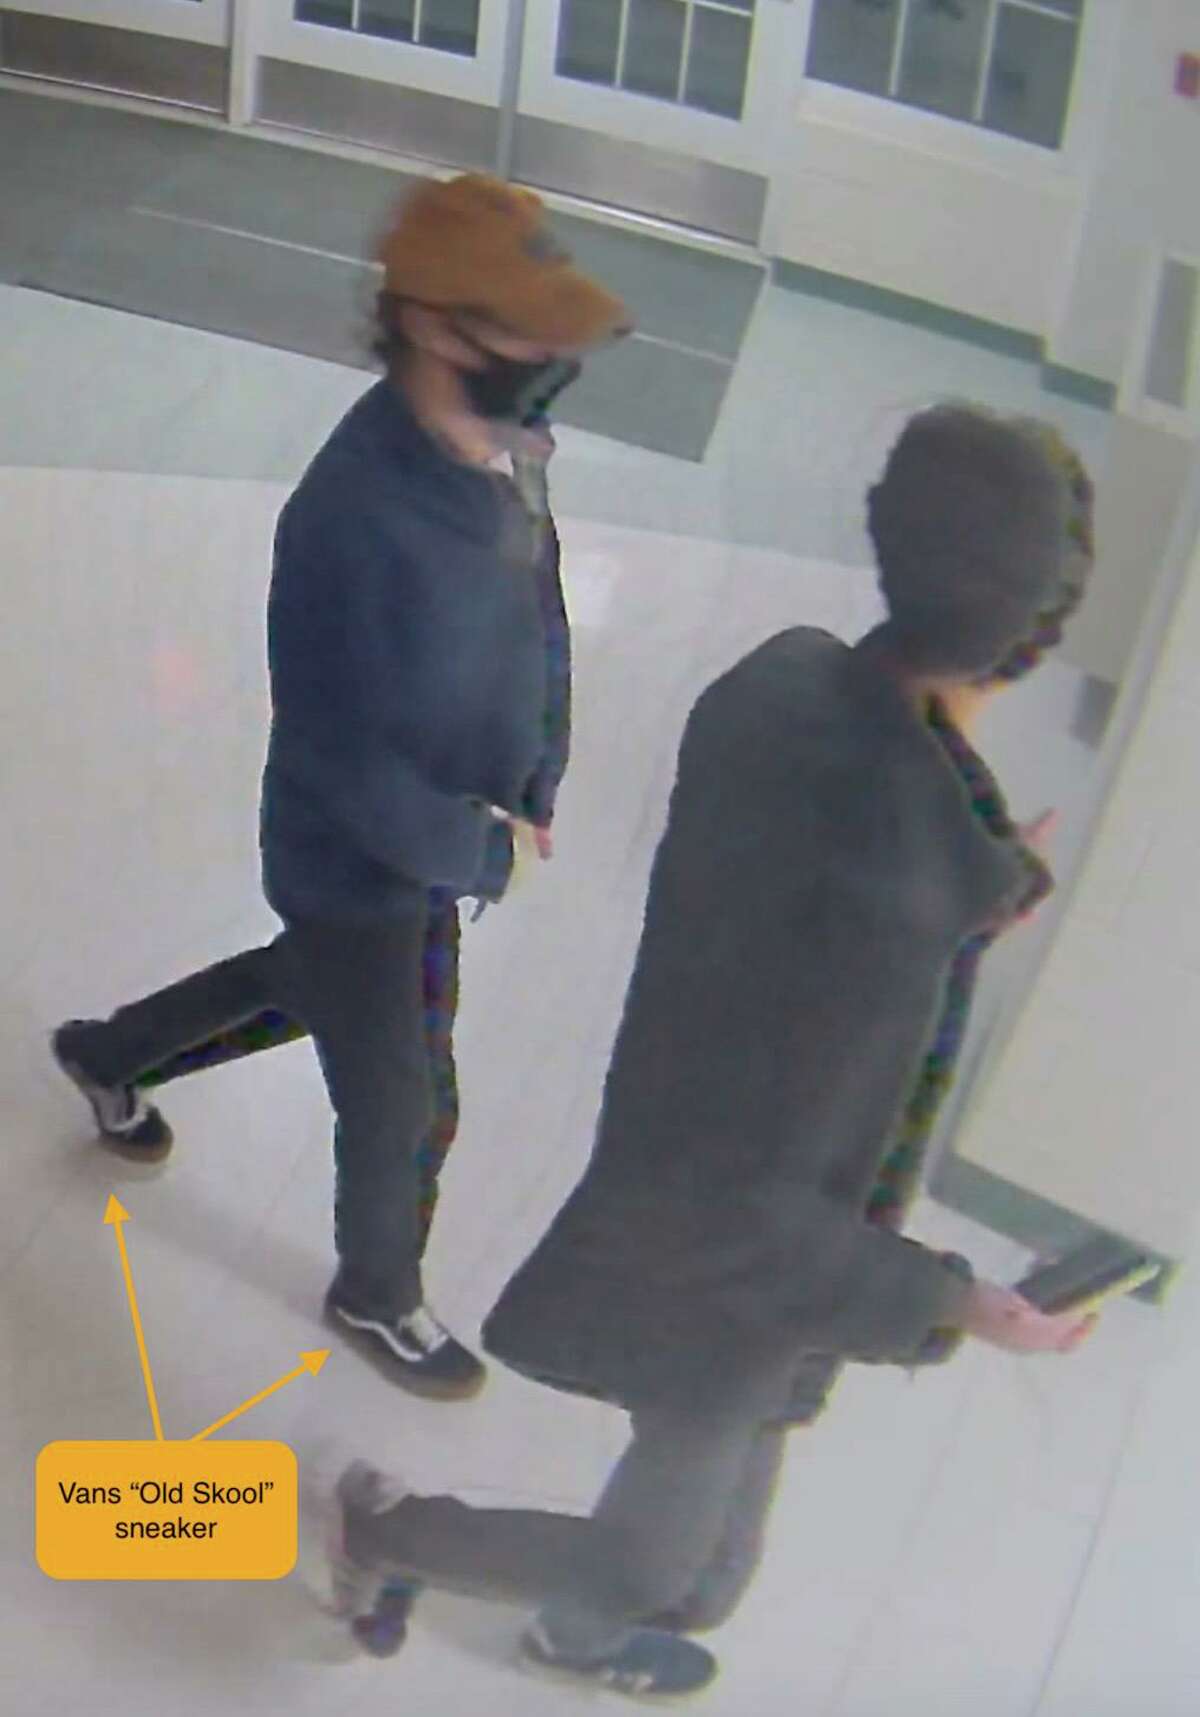 Darien Police released these photos of suspects who allegedly broke into Middlesex Middle School in Darien in late November on Jan. 13 asking the public's help identifying them. Police said they had id'd the suspects, who police said are not juveniles, as of Thursday, Jan. 14.